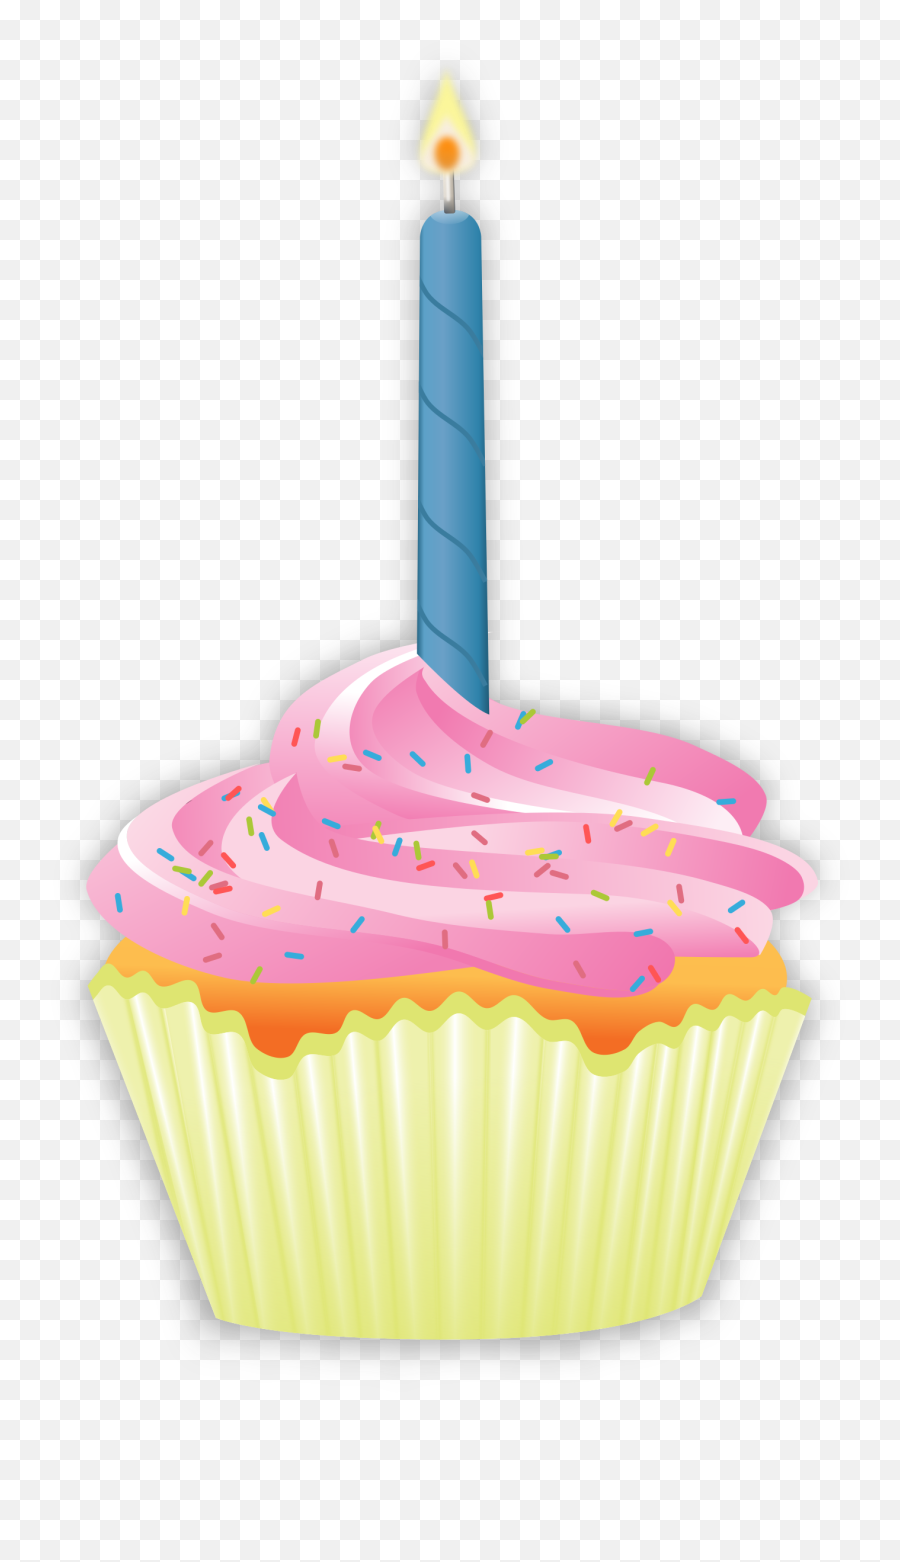 Download Clipart Cupcake Big Image - Cupcake With Candle Emoji,Birthday Candle Clipart